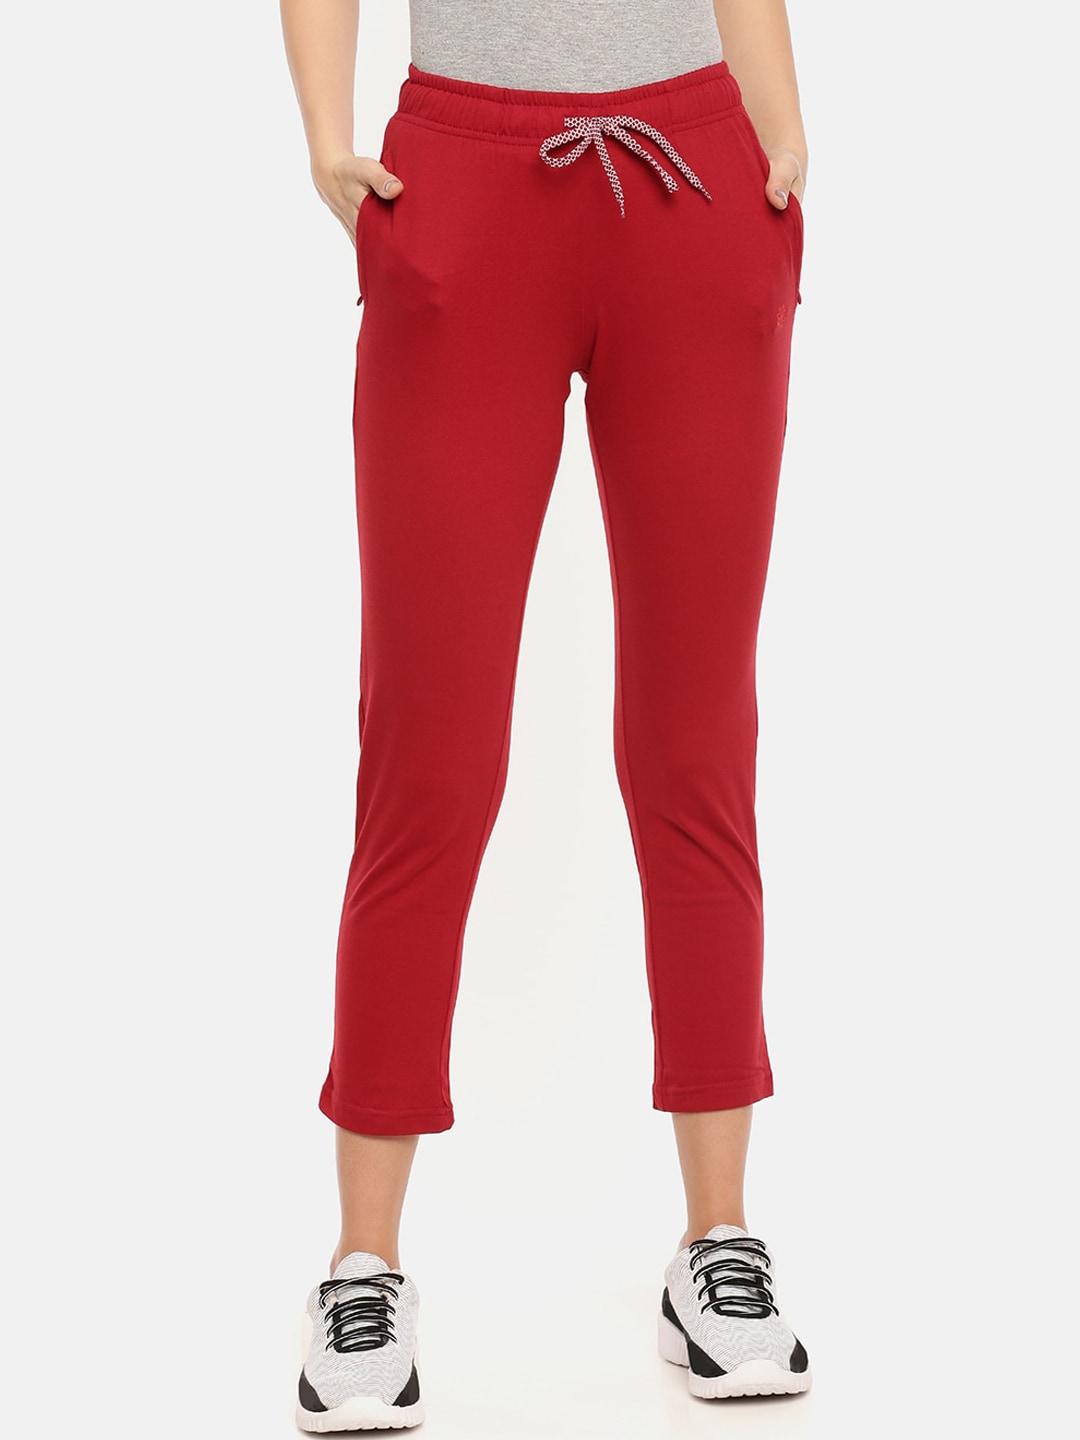 dollar missy women red solid track pants